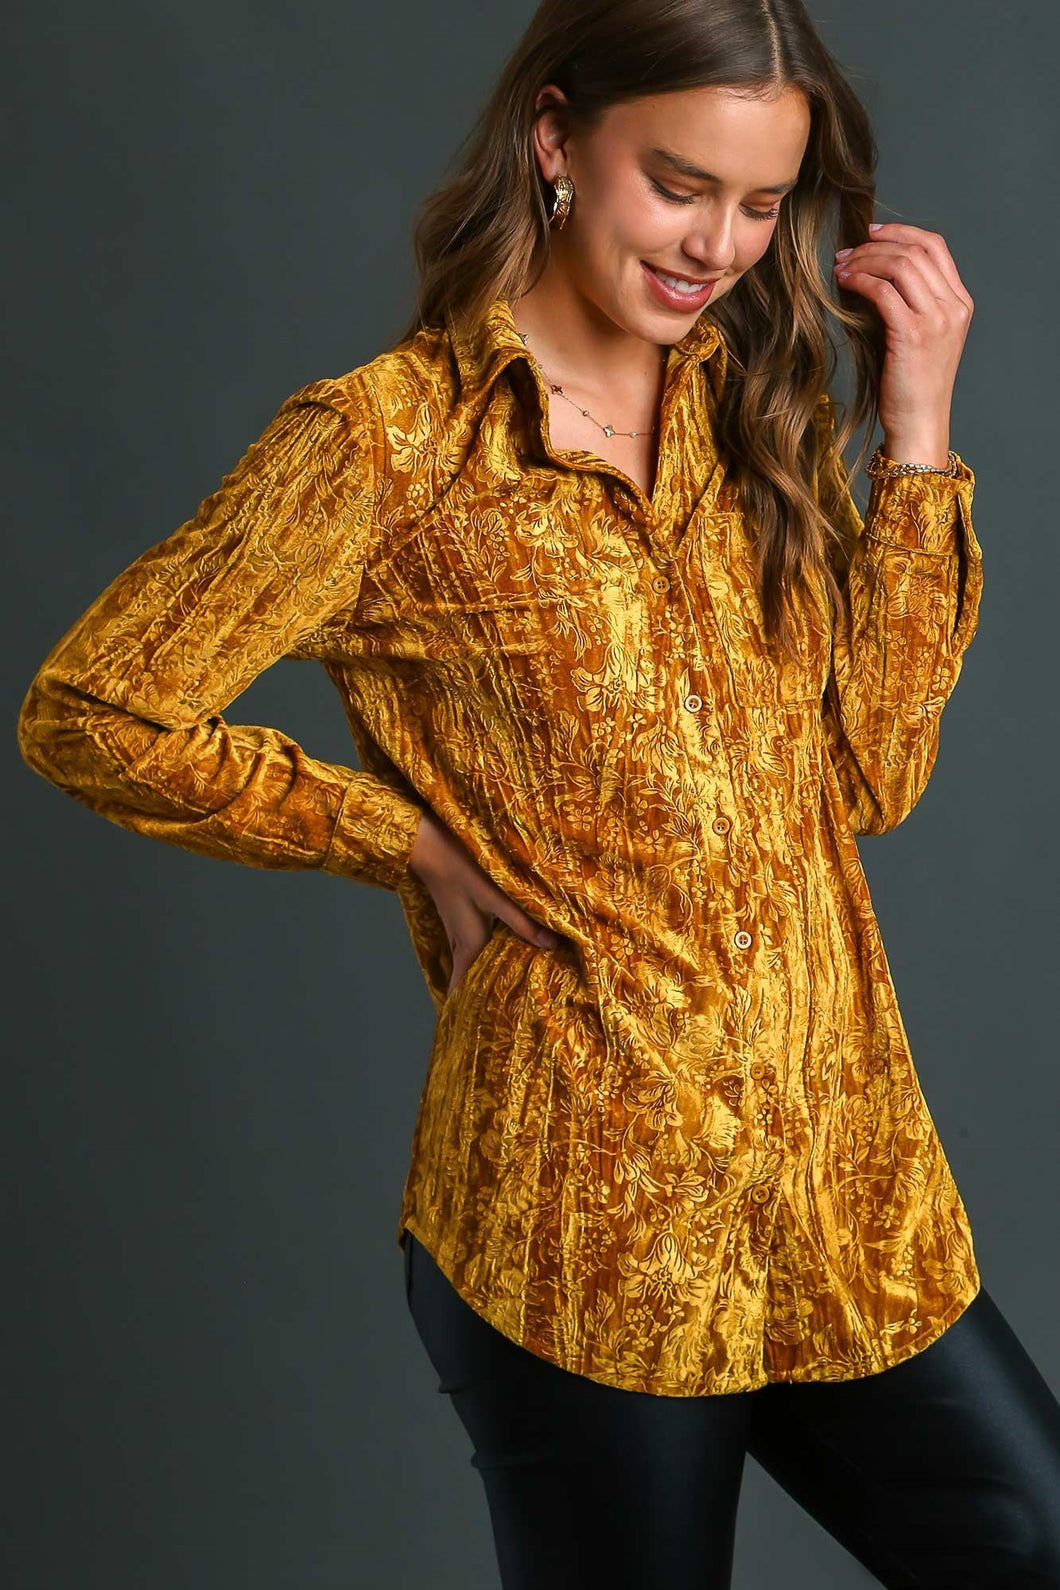 Umgee Velvet Printed Button Down Top in Mustard Shirts & Tops Umgee   